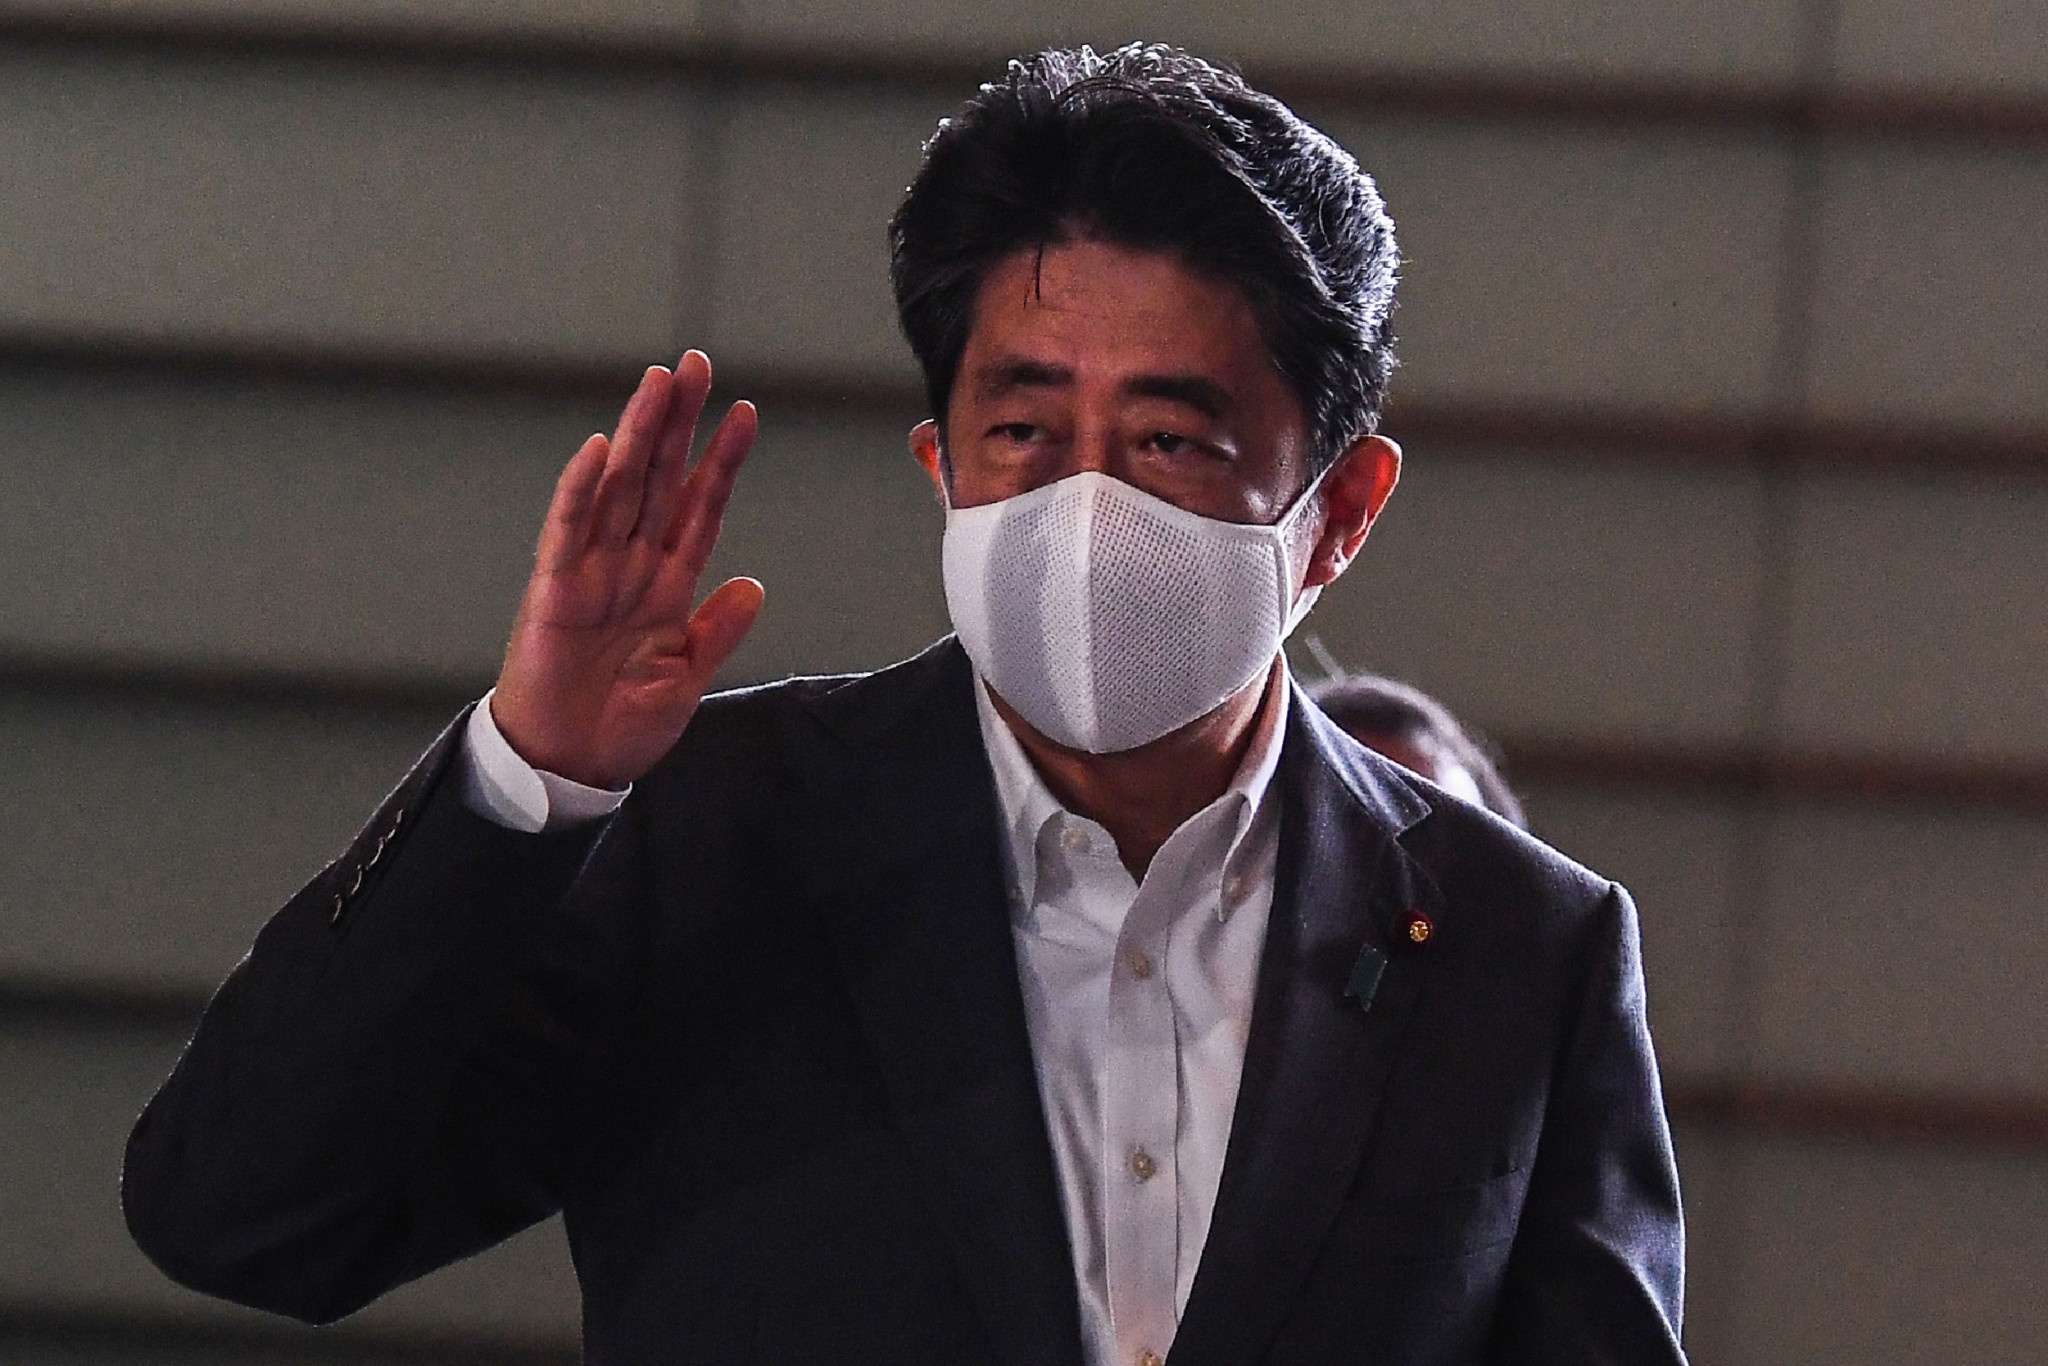 Japan's Liberal Democratic Party is set to vote on the successor for Prime Minister Shinzō Abe on September 14 ©Getty Images